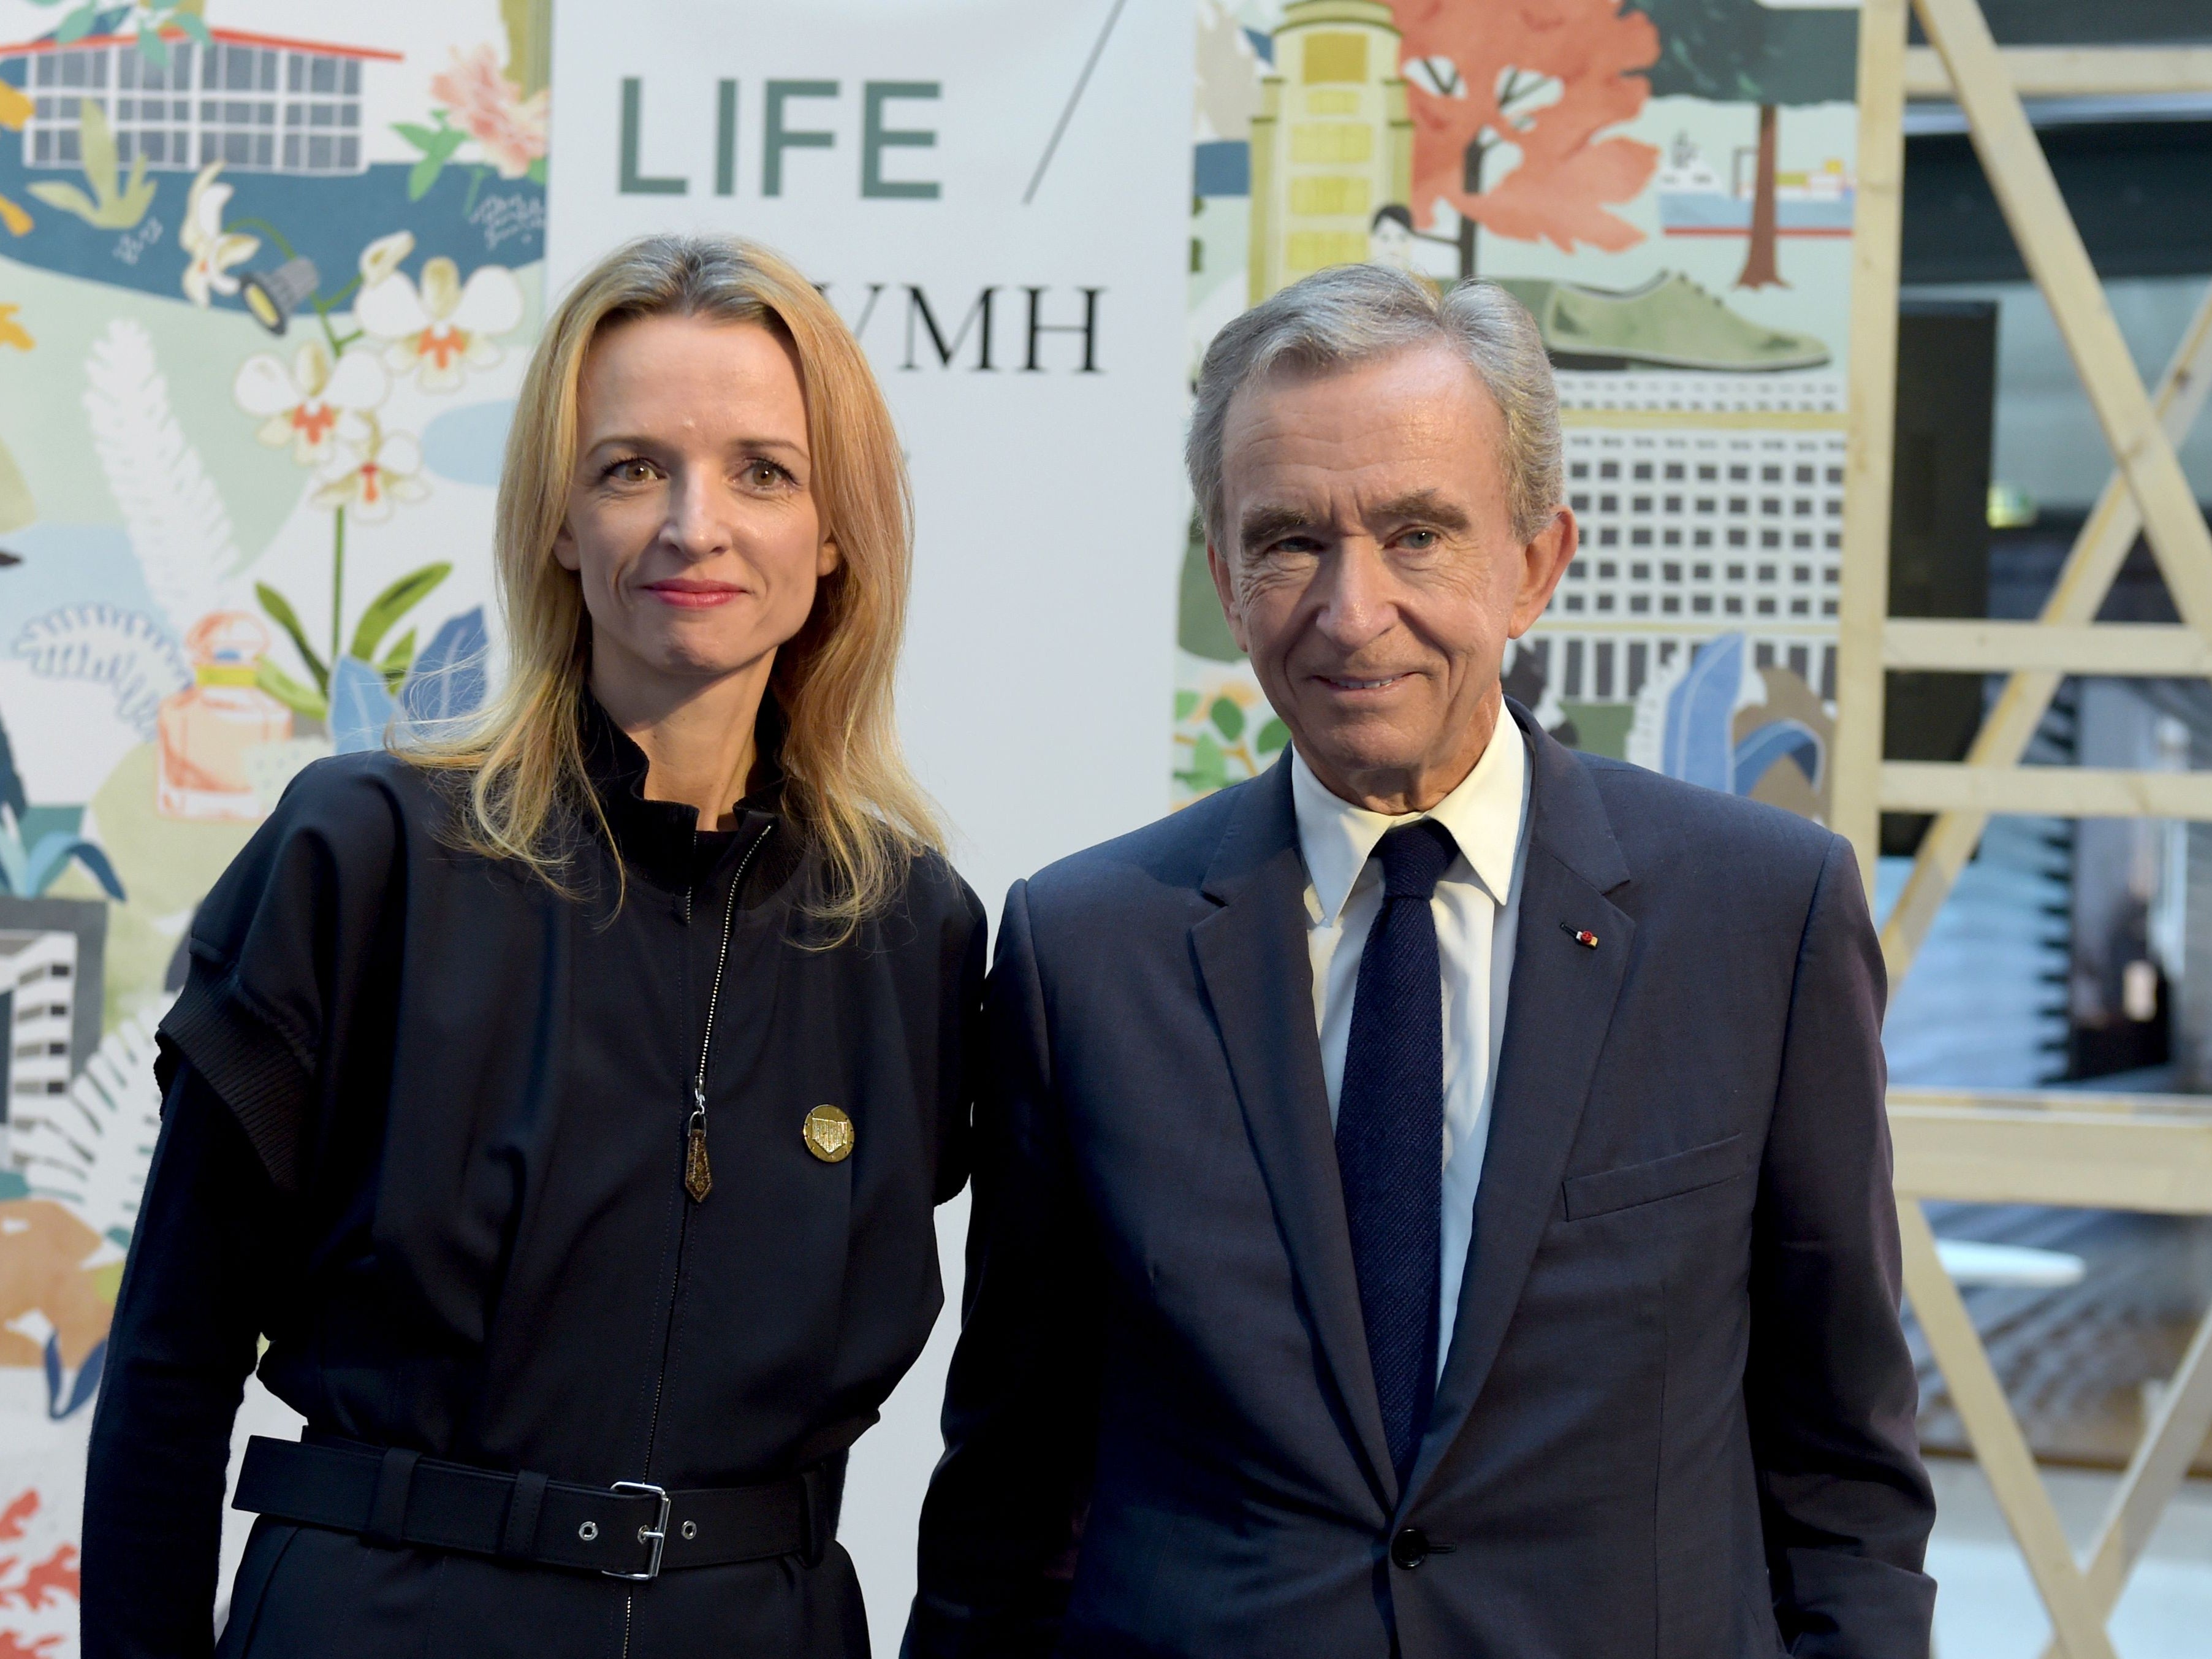 Why is LVMH a good place to start your career?